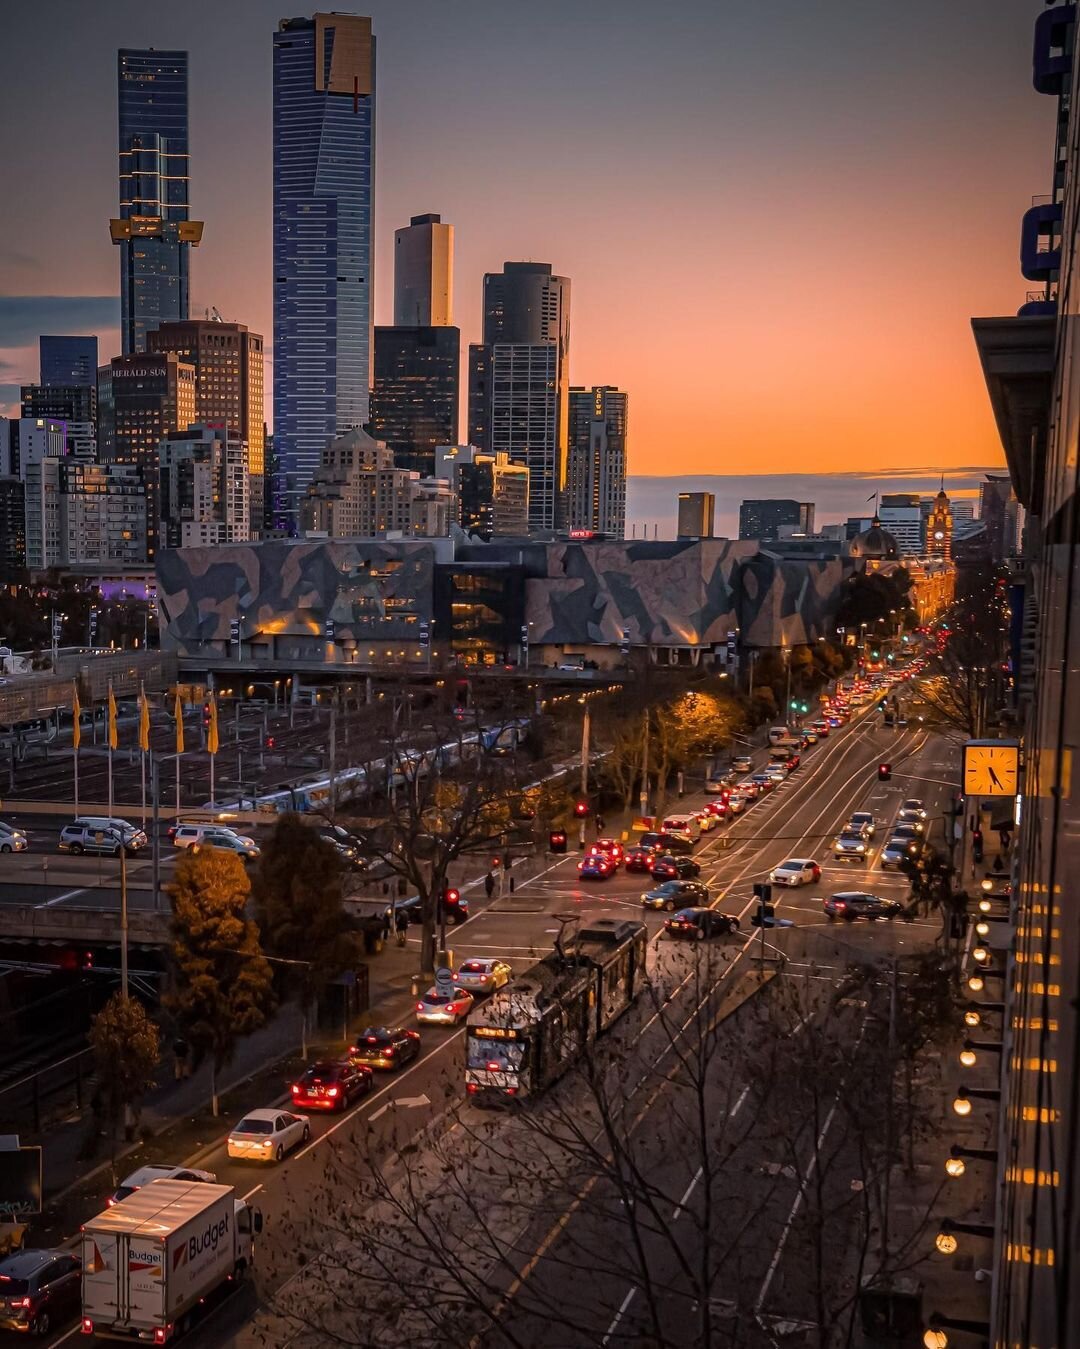 How awesome is this sunset captured over a still city skyline.

It&rsquo;s never too late to book your staycay for the weekend. Link in bio
⁣
📸 @kingpedro27 

#LivetheMelbourneCityLifestyle #melbourne #melbournelife #melbourneeats #melbournecityapar